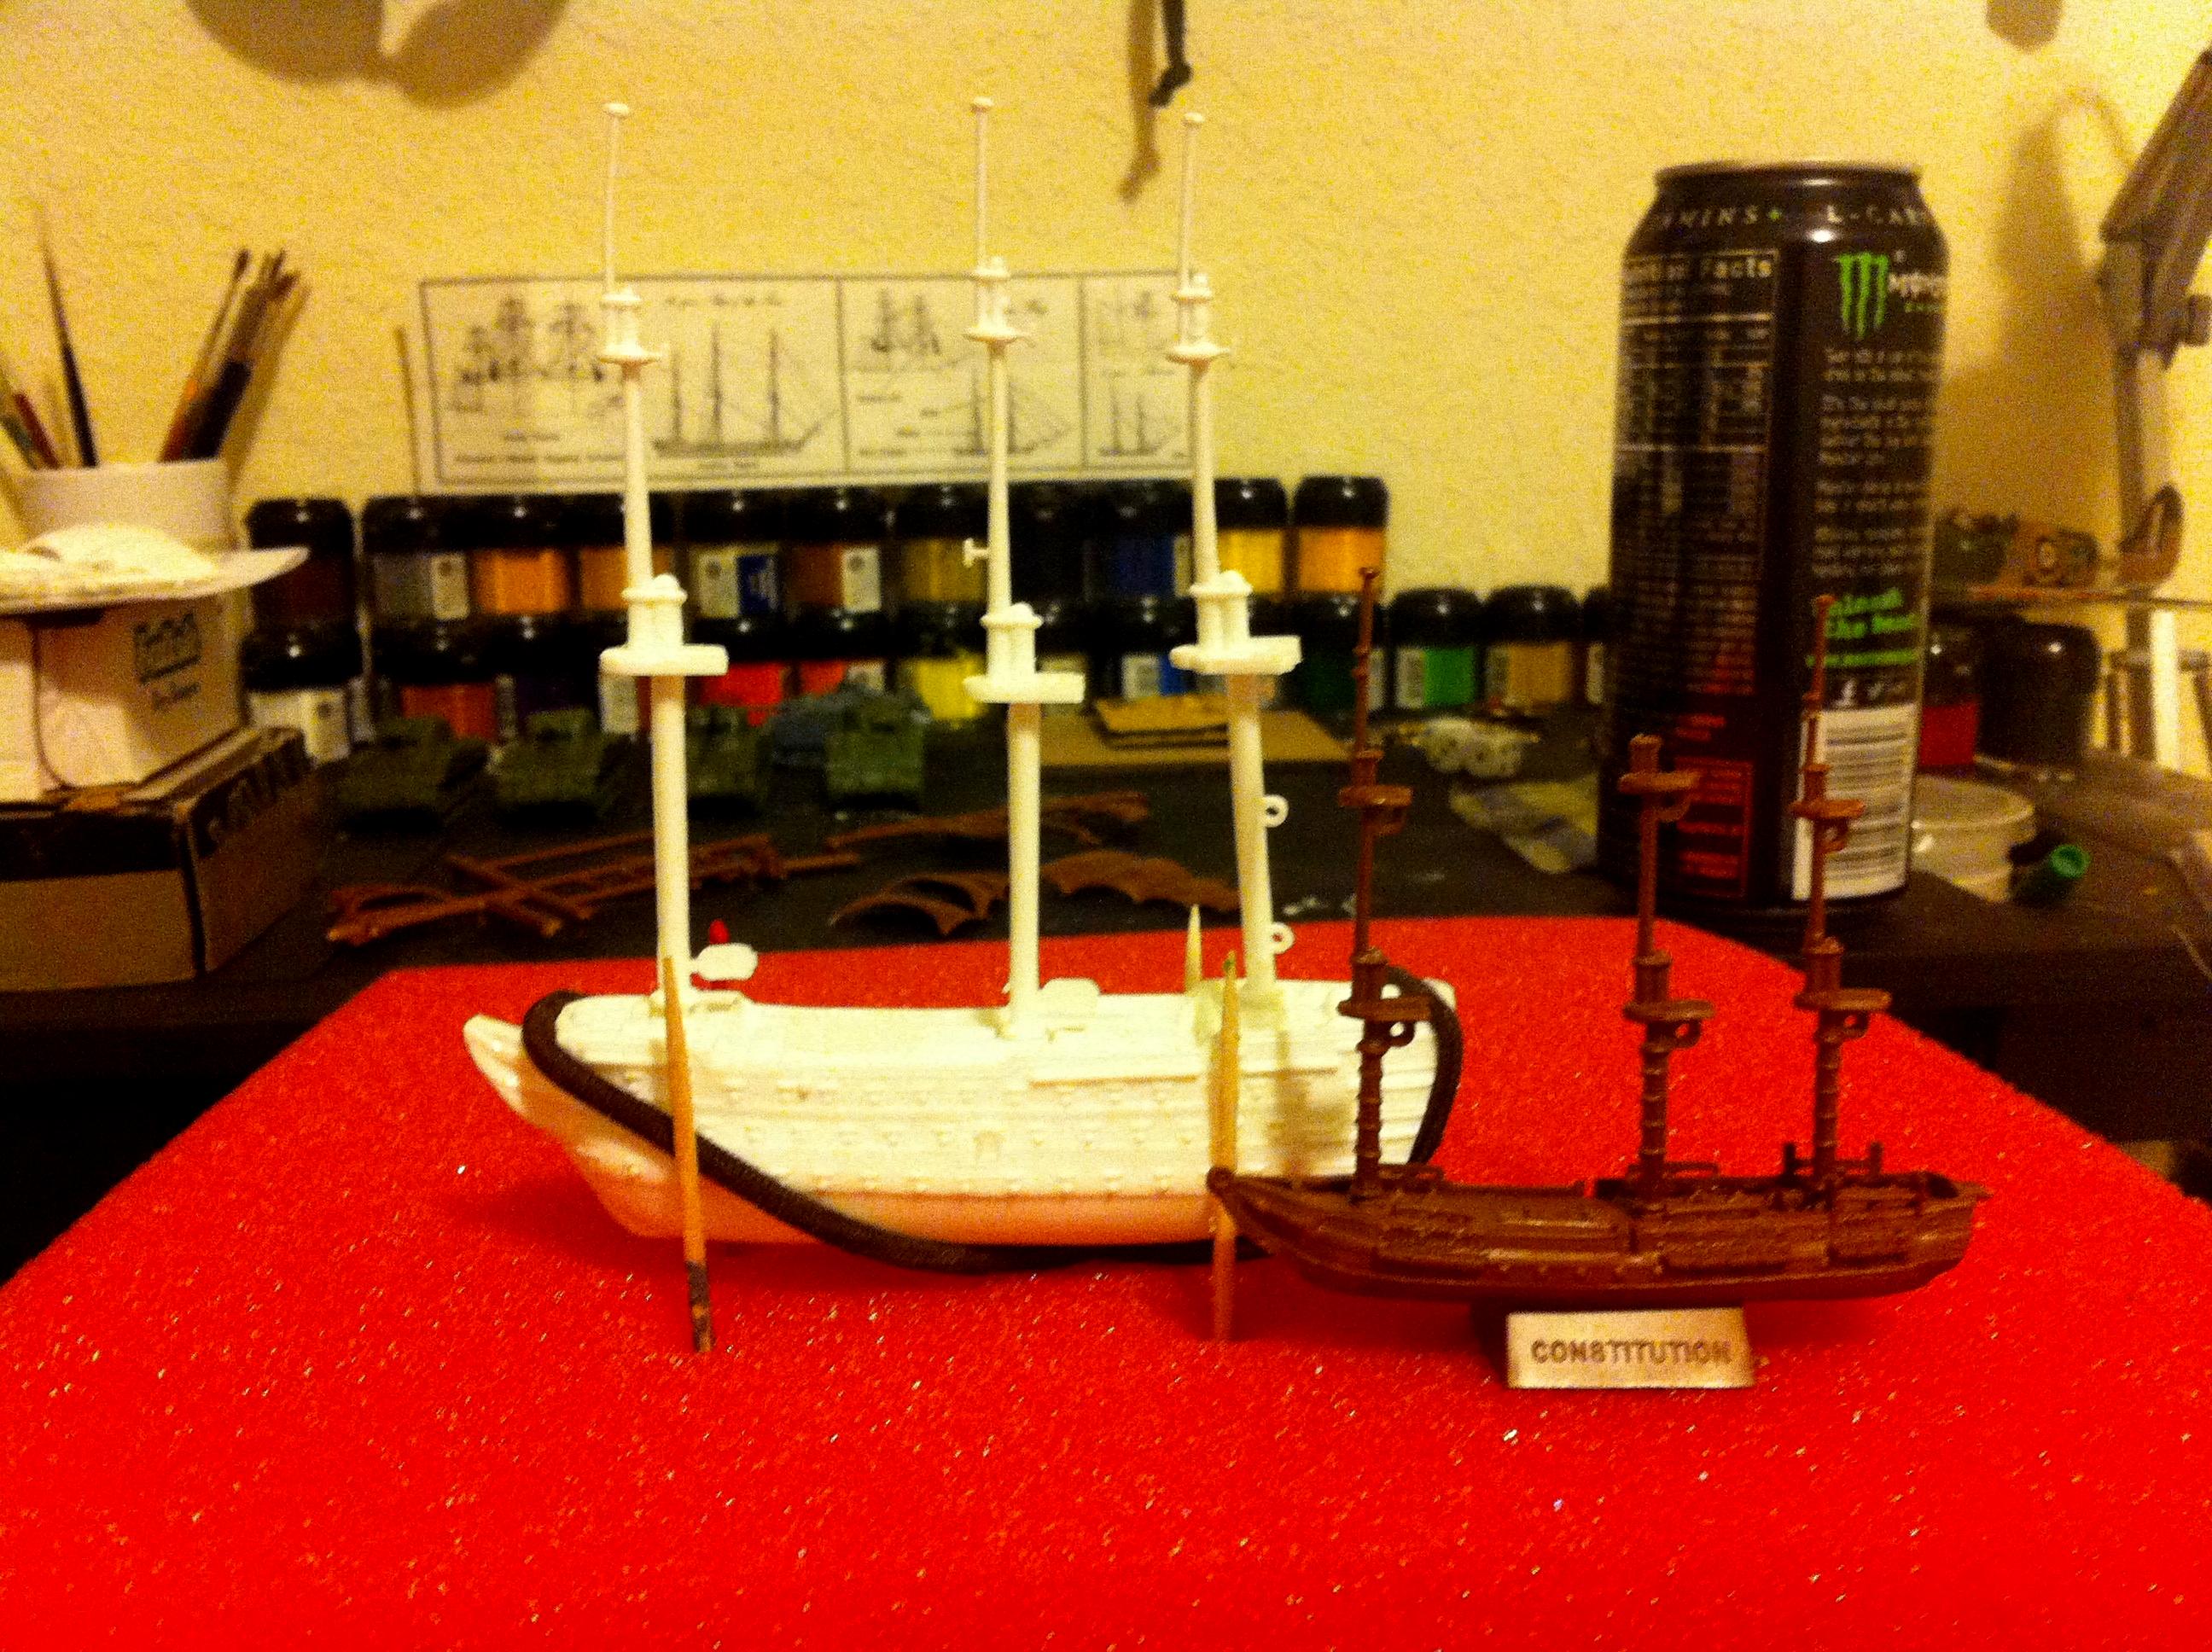 1/600 Age Of Sail, 1/600 Napoleonic, 1/600 Ship, Age Of Saill, Airfix 1/600 Hms Victory, Historical, Hms Victory, Miniature Wargames, Miniatures, Napoleonic, Napoleonic Navel, Napoleonic Ship, Navel Miniatures, Navel Wargames, Tabletop Wargames